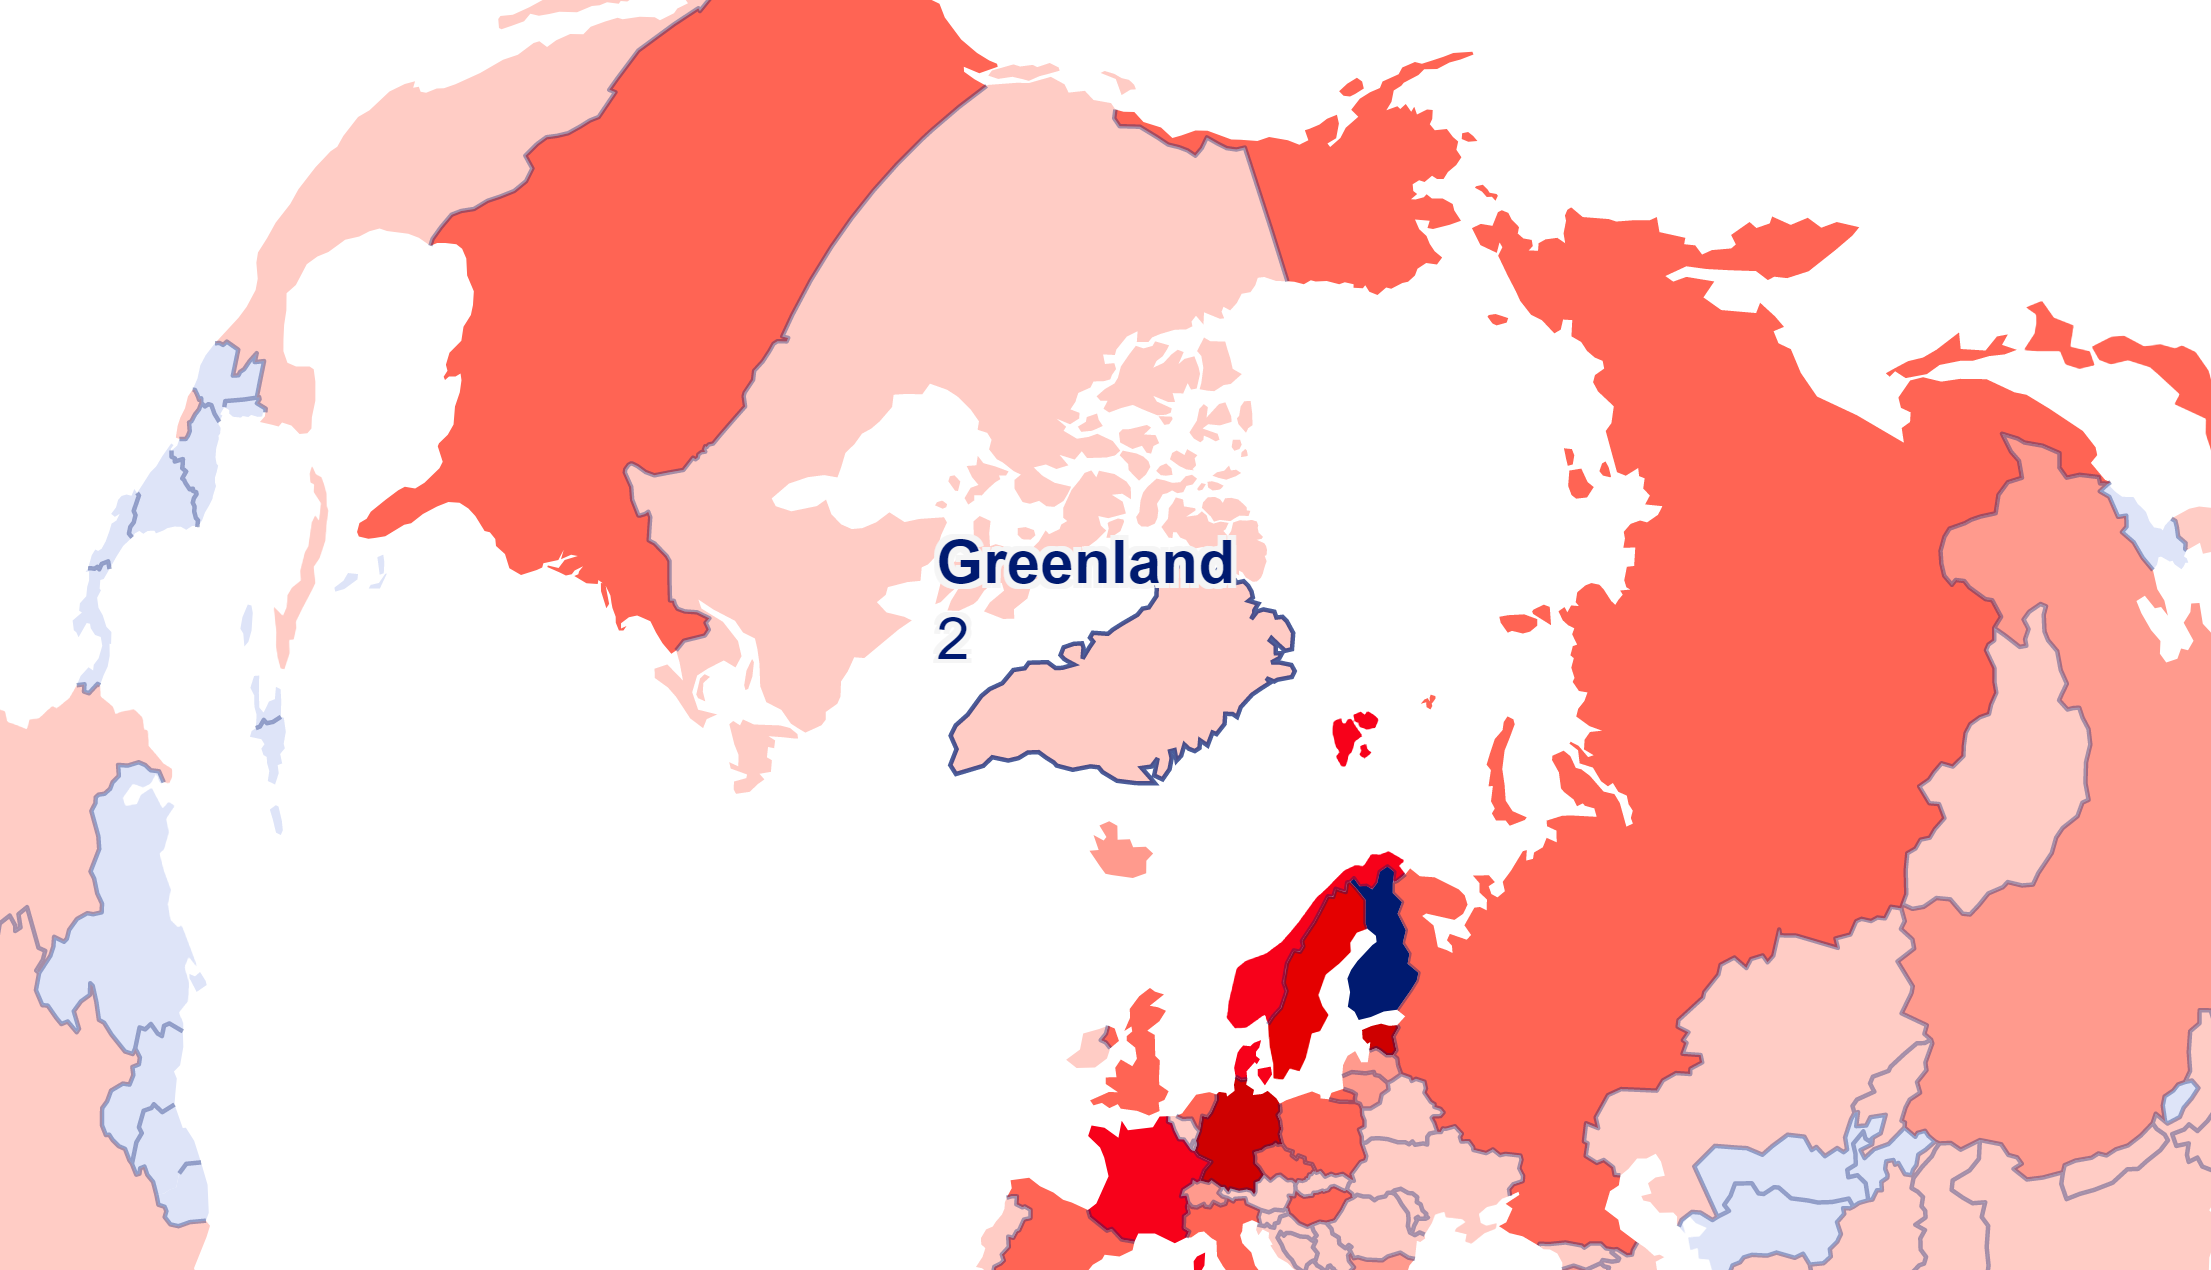 A zoomed-in view of the choropleth map.